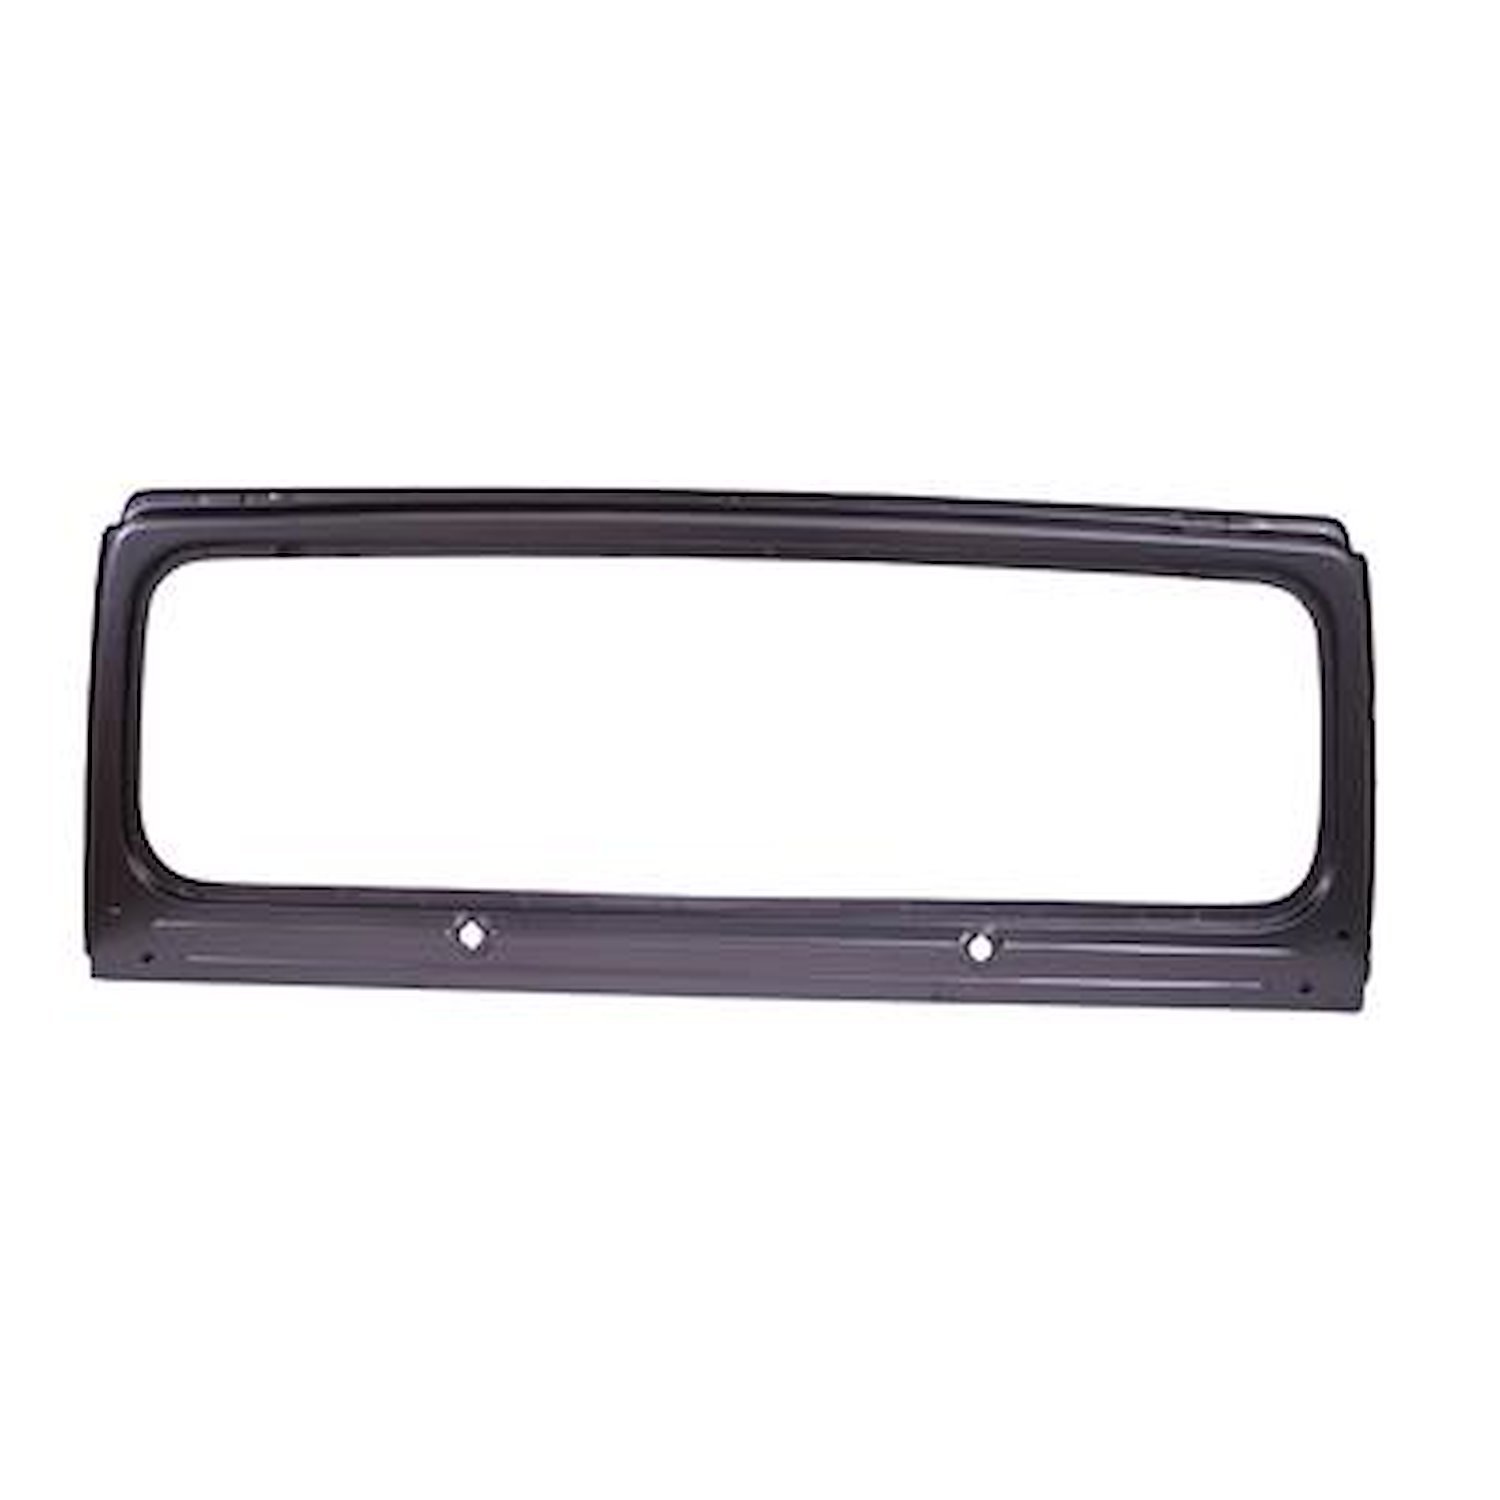 Factory-style replacement windshield frame from Omix-ADA, Fits 87-95 Jeep Wrangler YJ